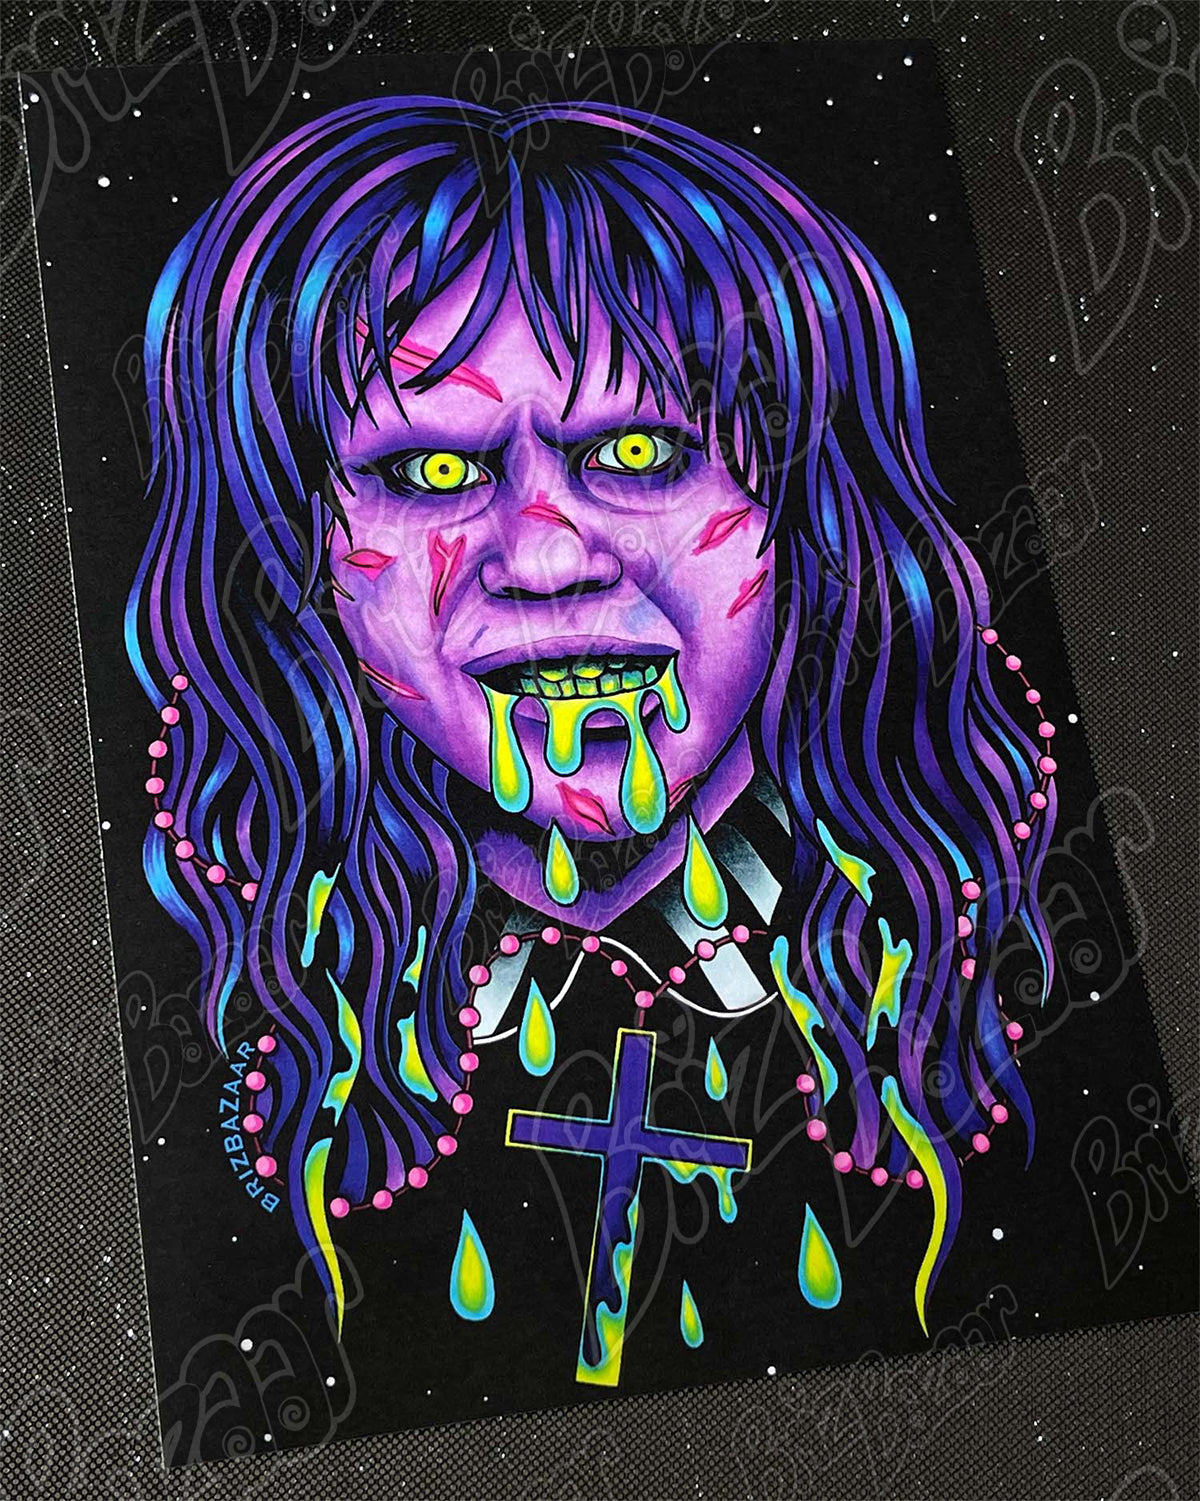 5" x 7" Card Print of Brizzorcizt